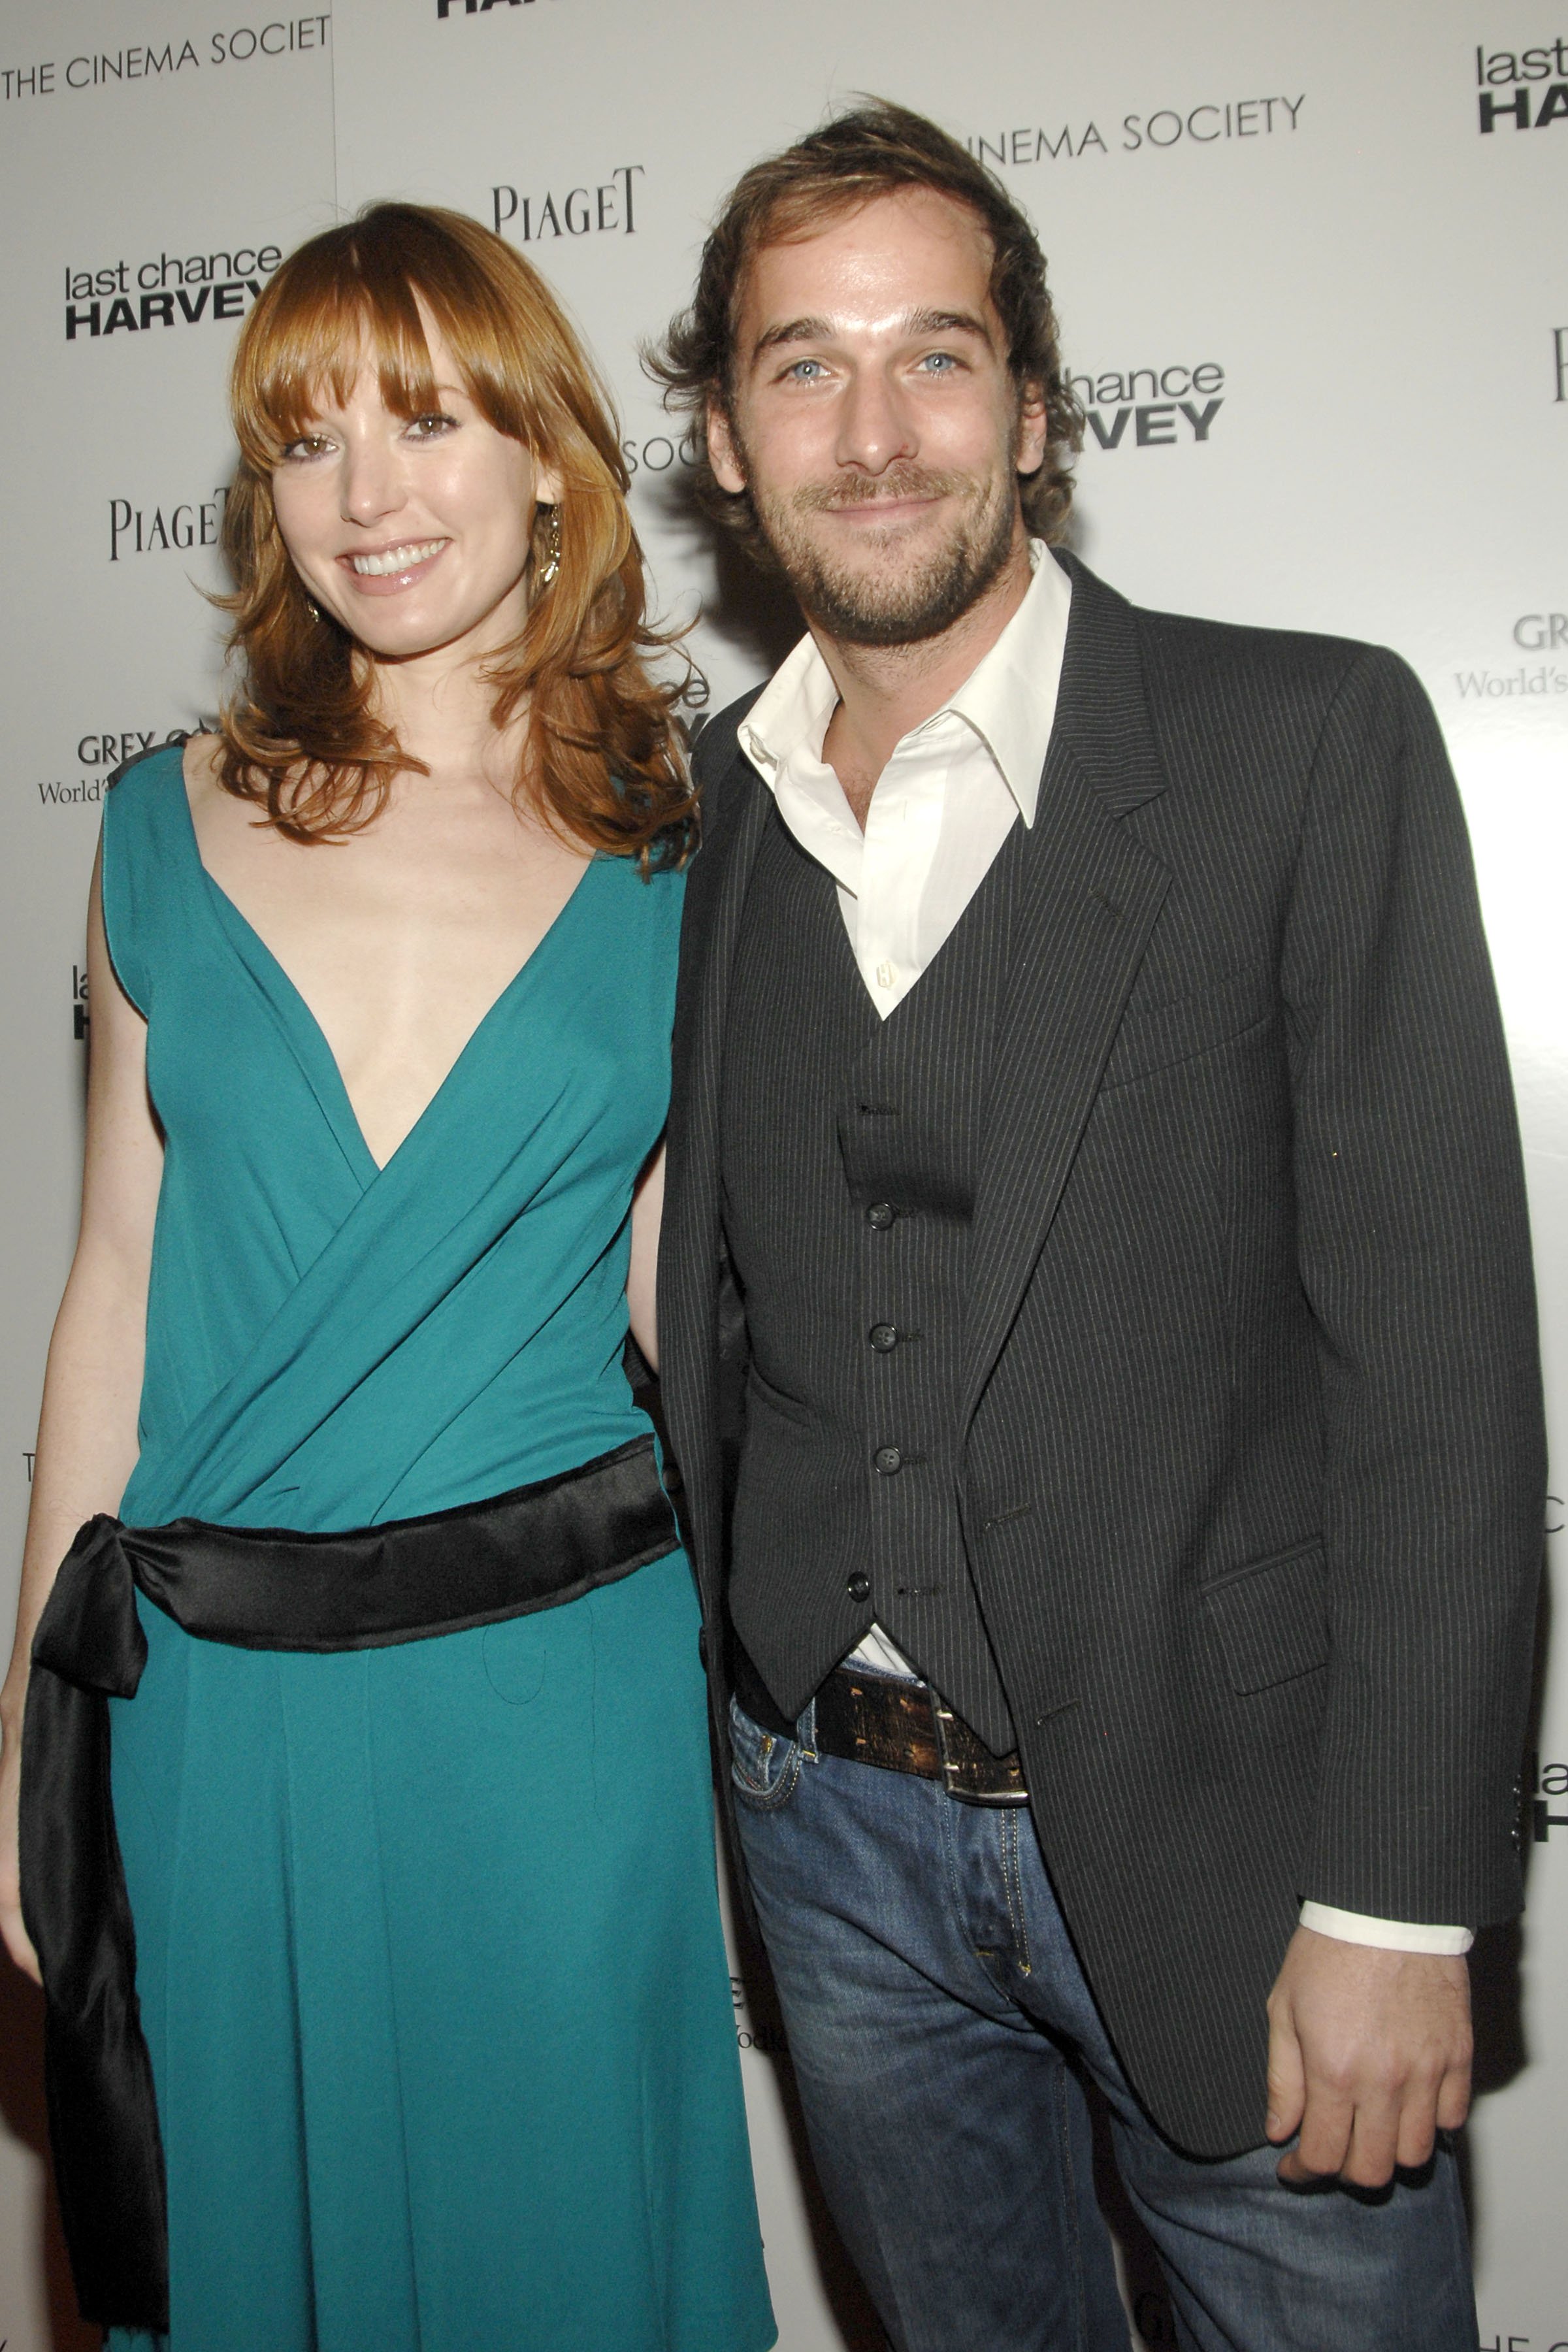 Alicia Witt and Peter Krause pose for a photo at The Cinema Society & Piaget screening of "Last Chance Harvey" at AMC Lincoln Square Broadway on November 19, 2008, in New York City | Source: Getty Images